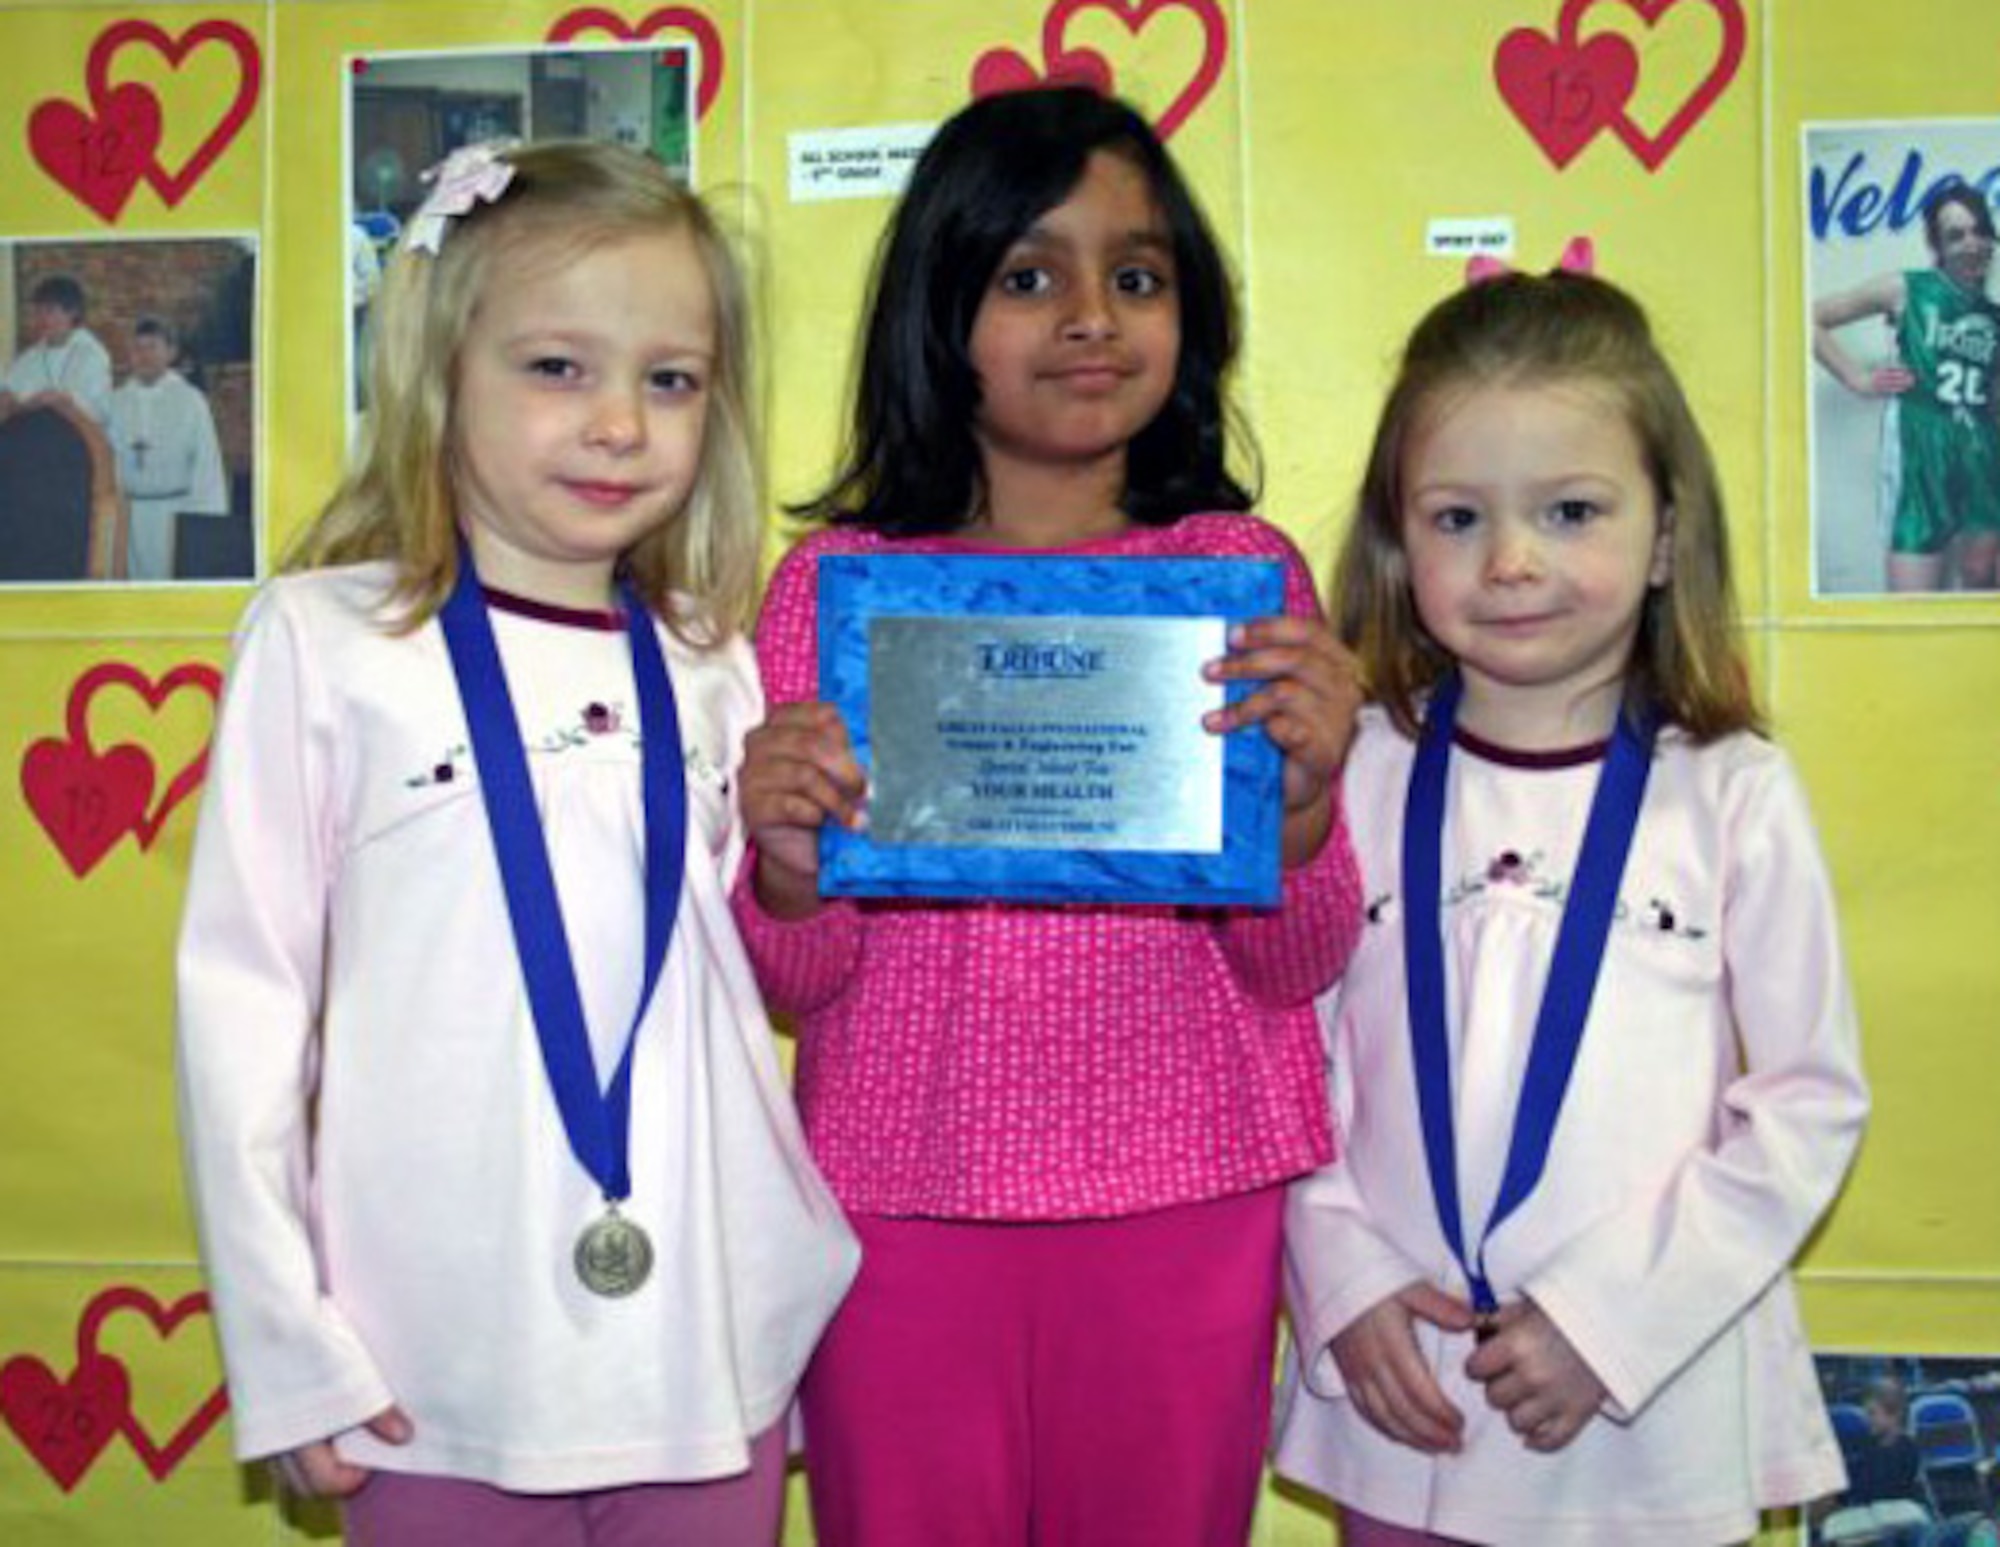 Little Warriors Emma and Mae Claire, 5, and their friend Gail, 5, (center) from Our Lady of Lourdes Catholic School, took first place medals in the kindergarten and first grade life science competition at the Great Falls Regional Science and Engineering Fair at the Mansfield Convention Center Feb. 9 . The trio also won the creativity award, a special merit award and the Great Falls Health Award for which they received plaques. (U.S. Air Force photo/ Suzanne Sabin)